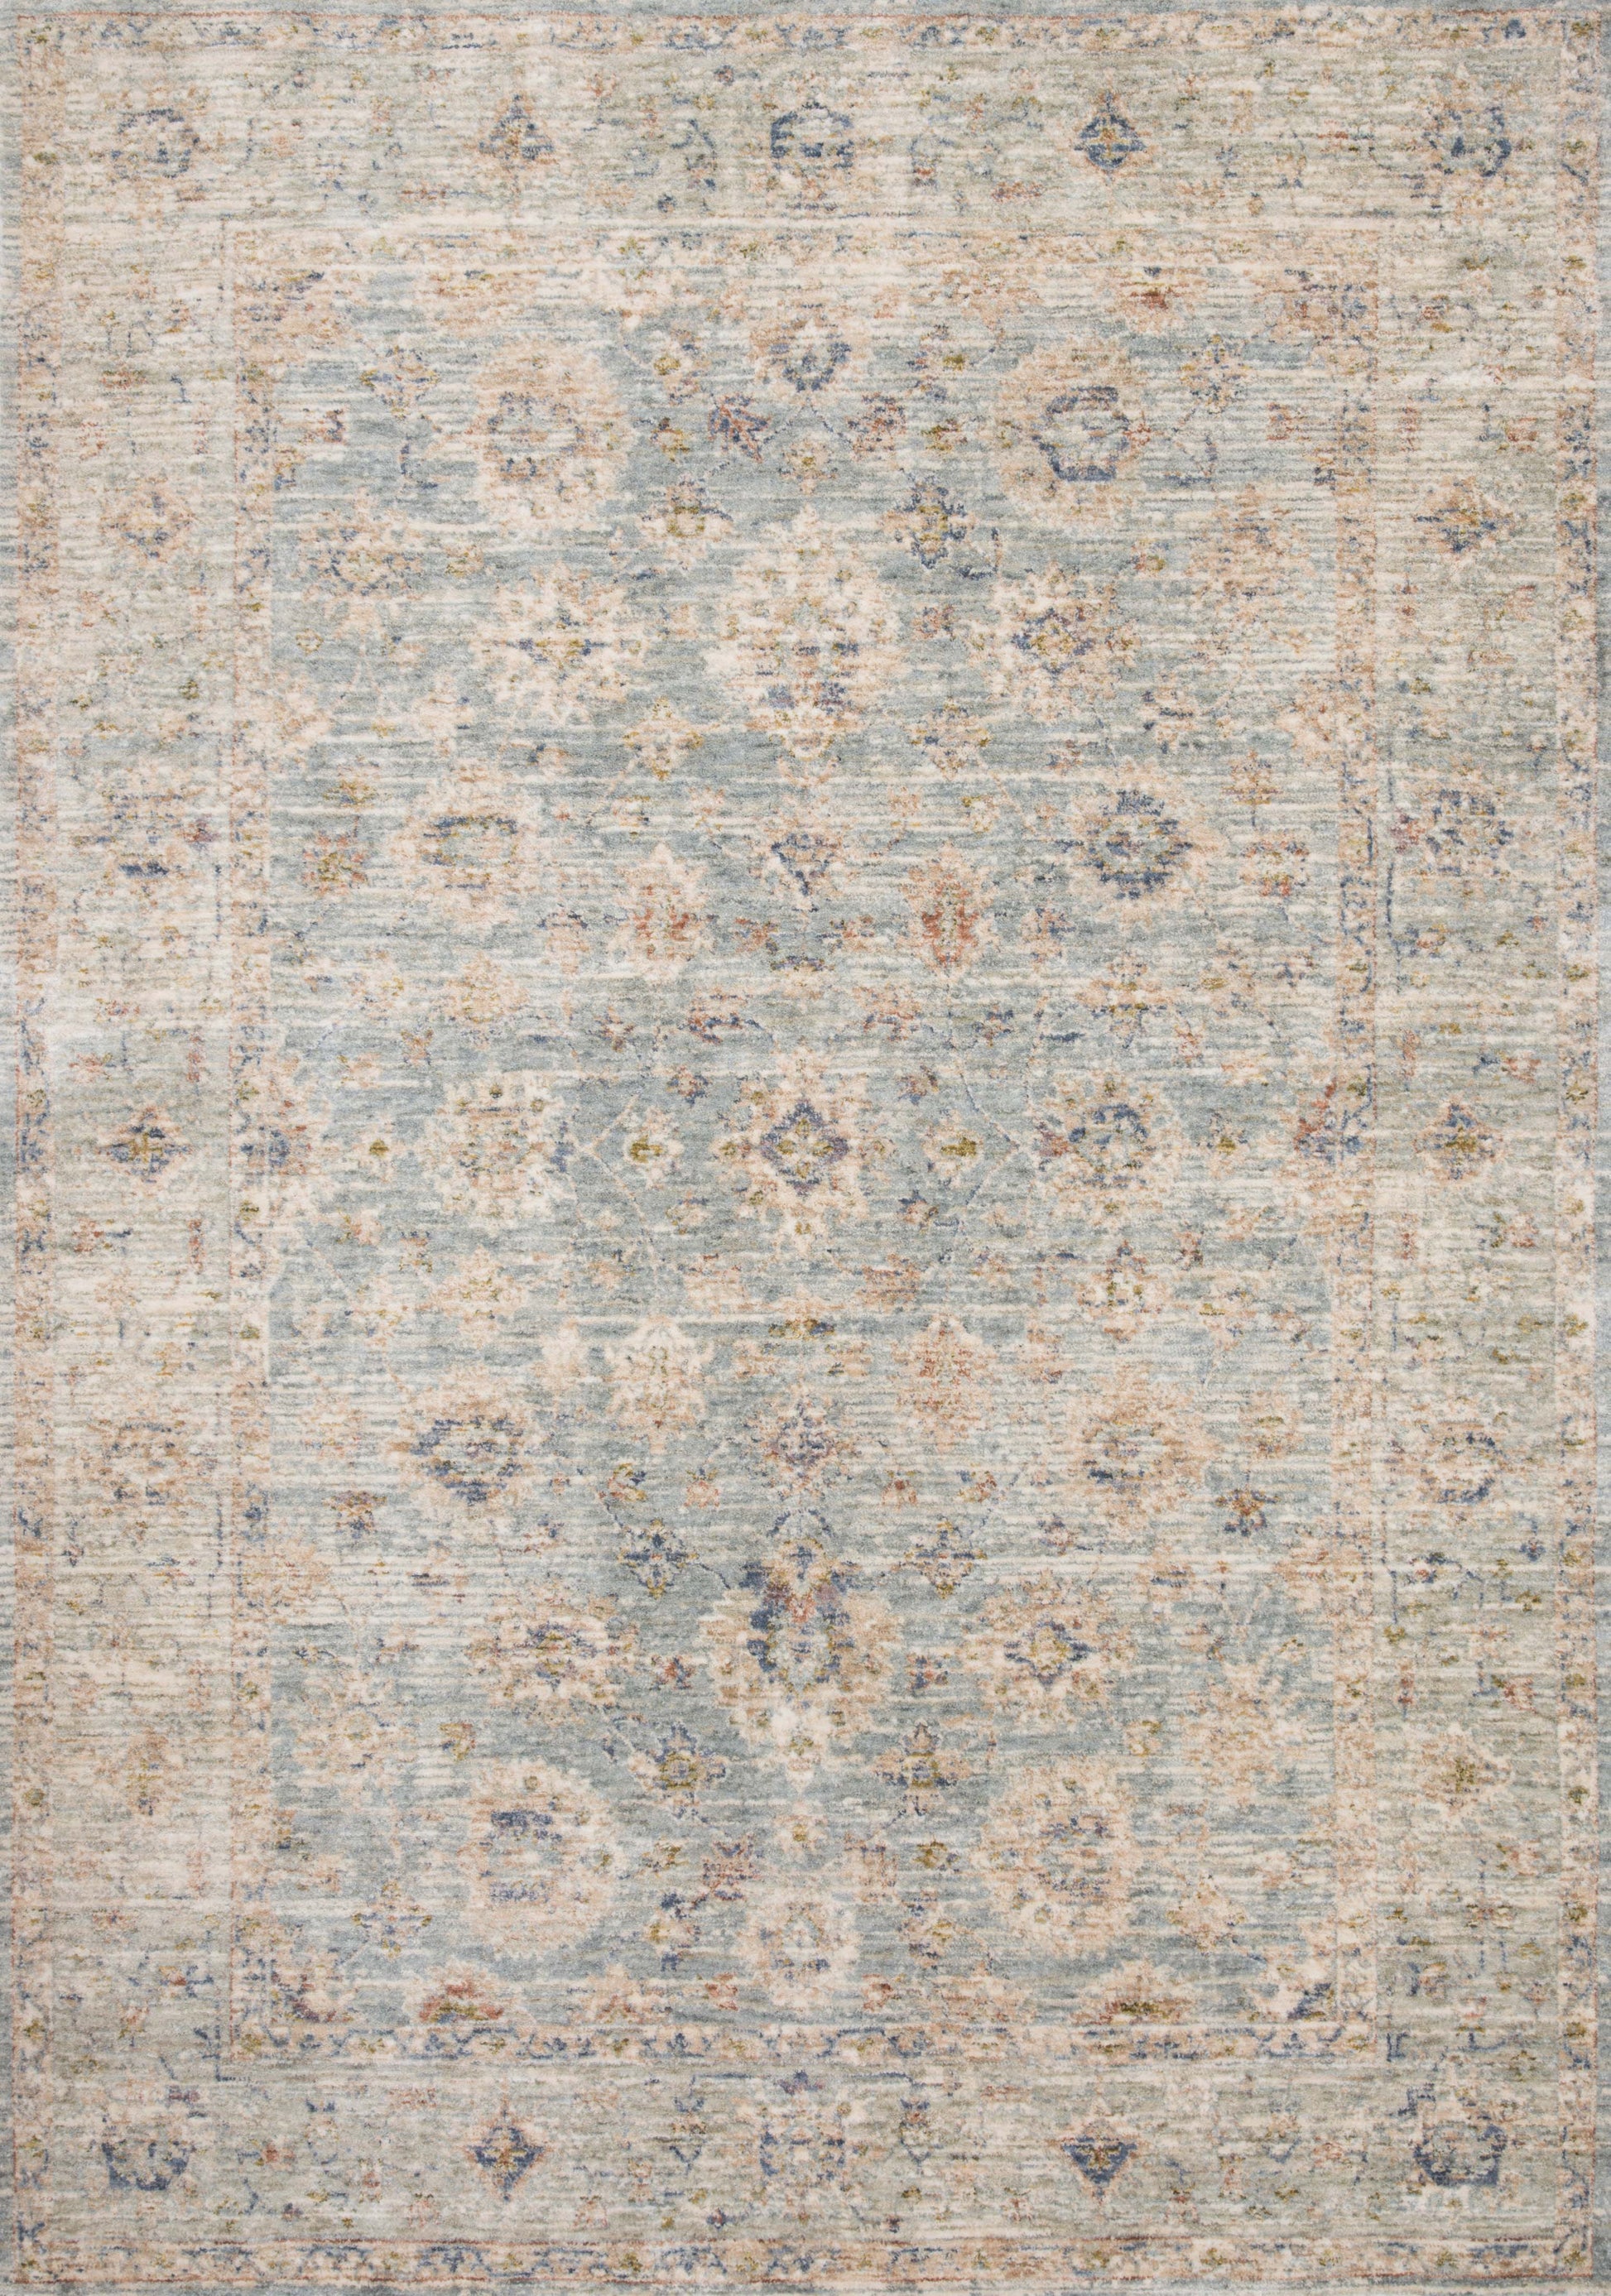 A picture of Loloi's Revere rug, in style REV-09, color Light Blue / Multi